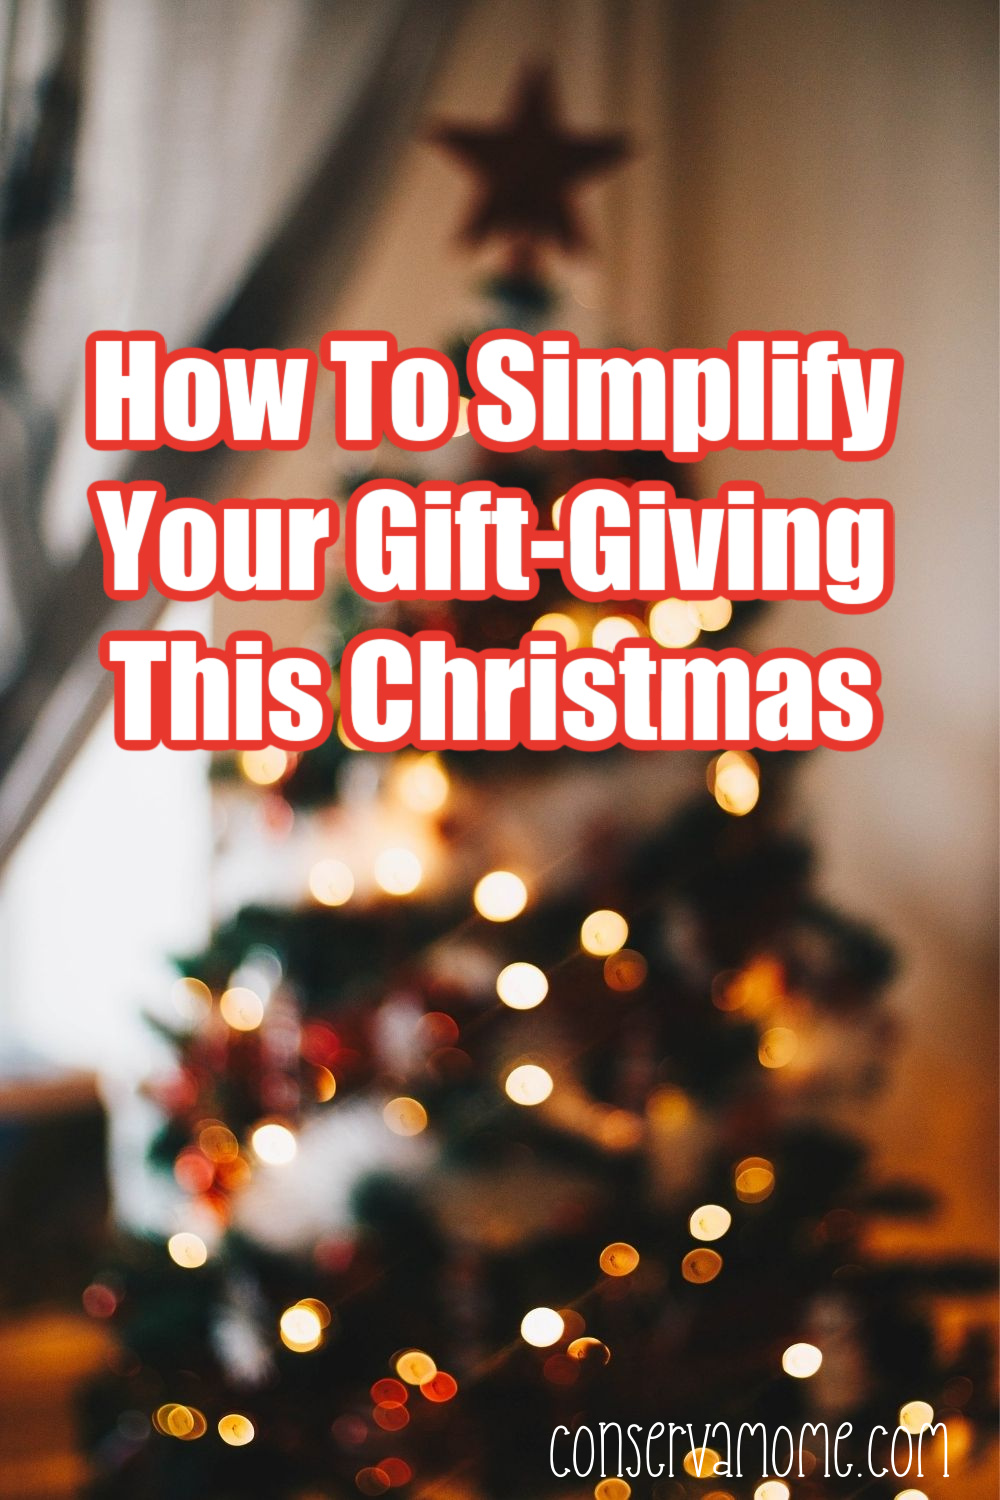 How To Simplify Your Gift-Giving This Christmas